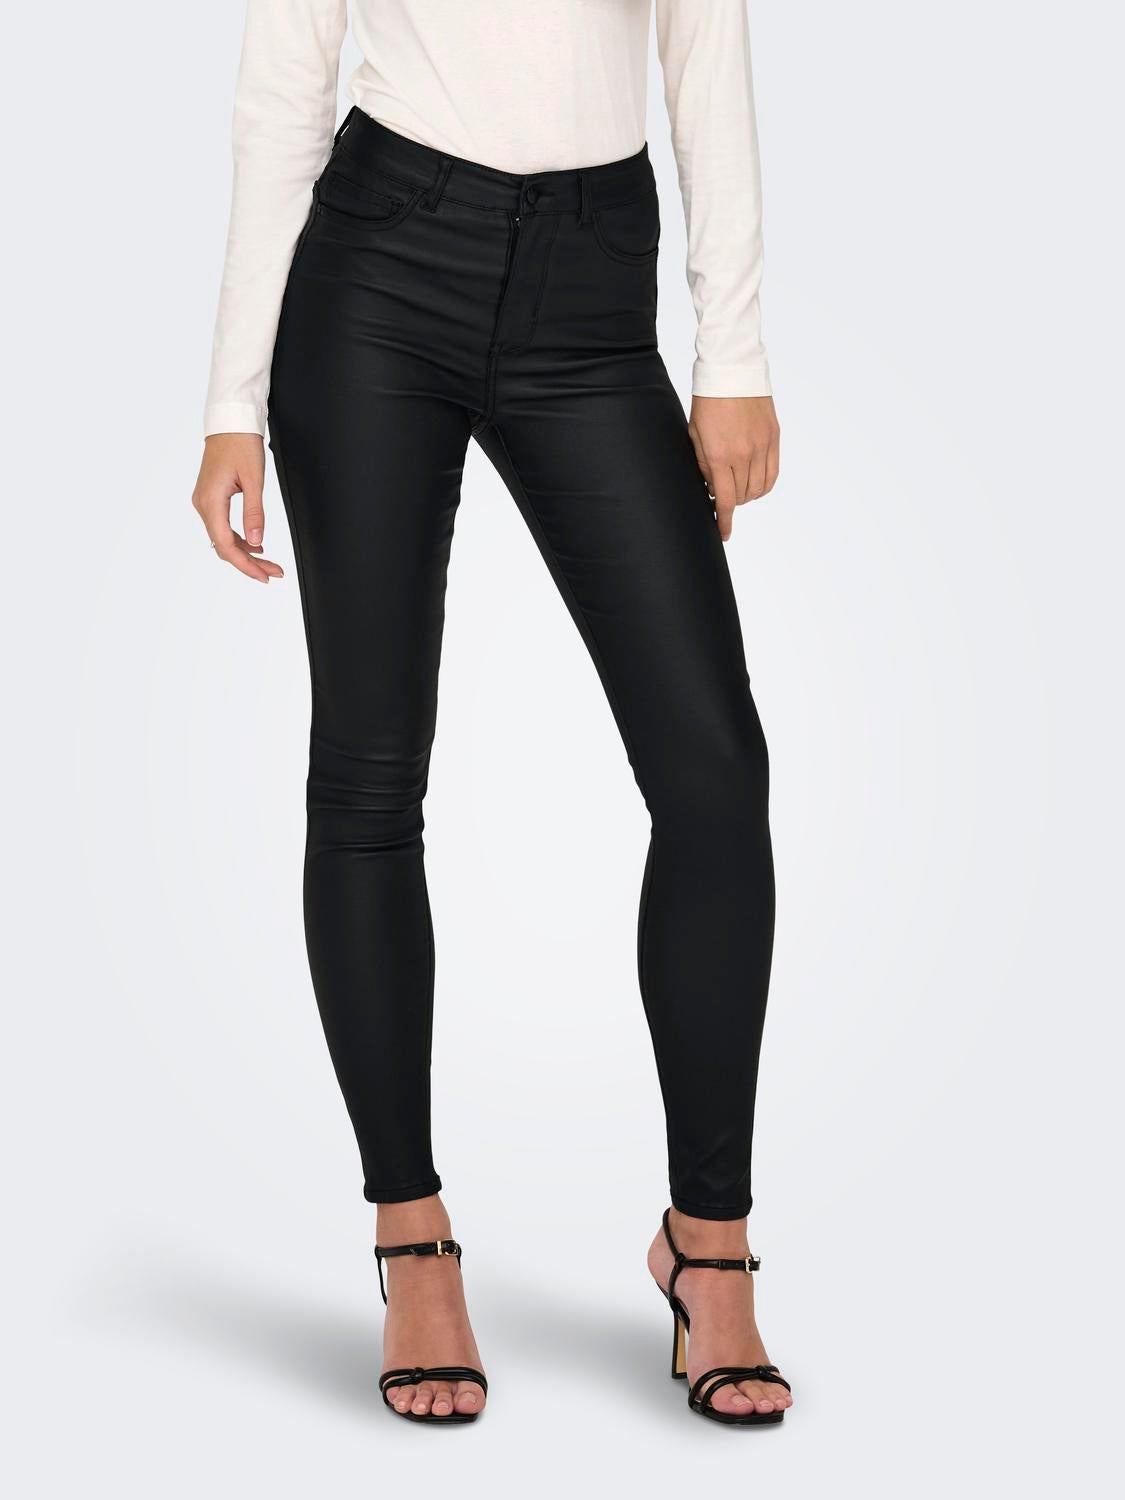 River Island faux leather skinny pants in black | ASOS